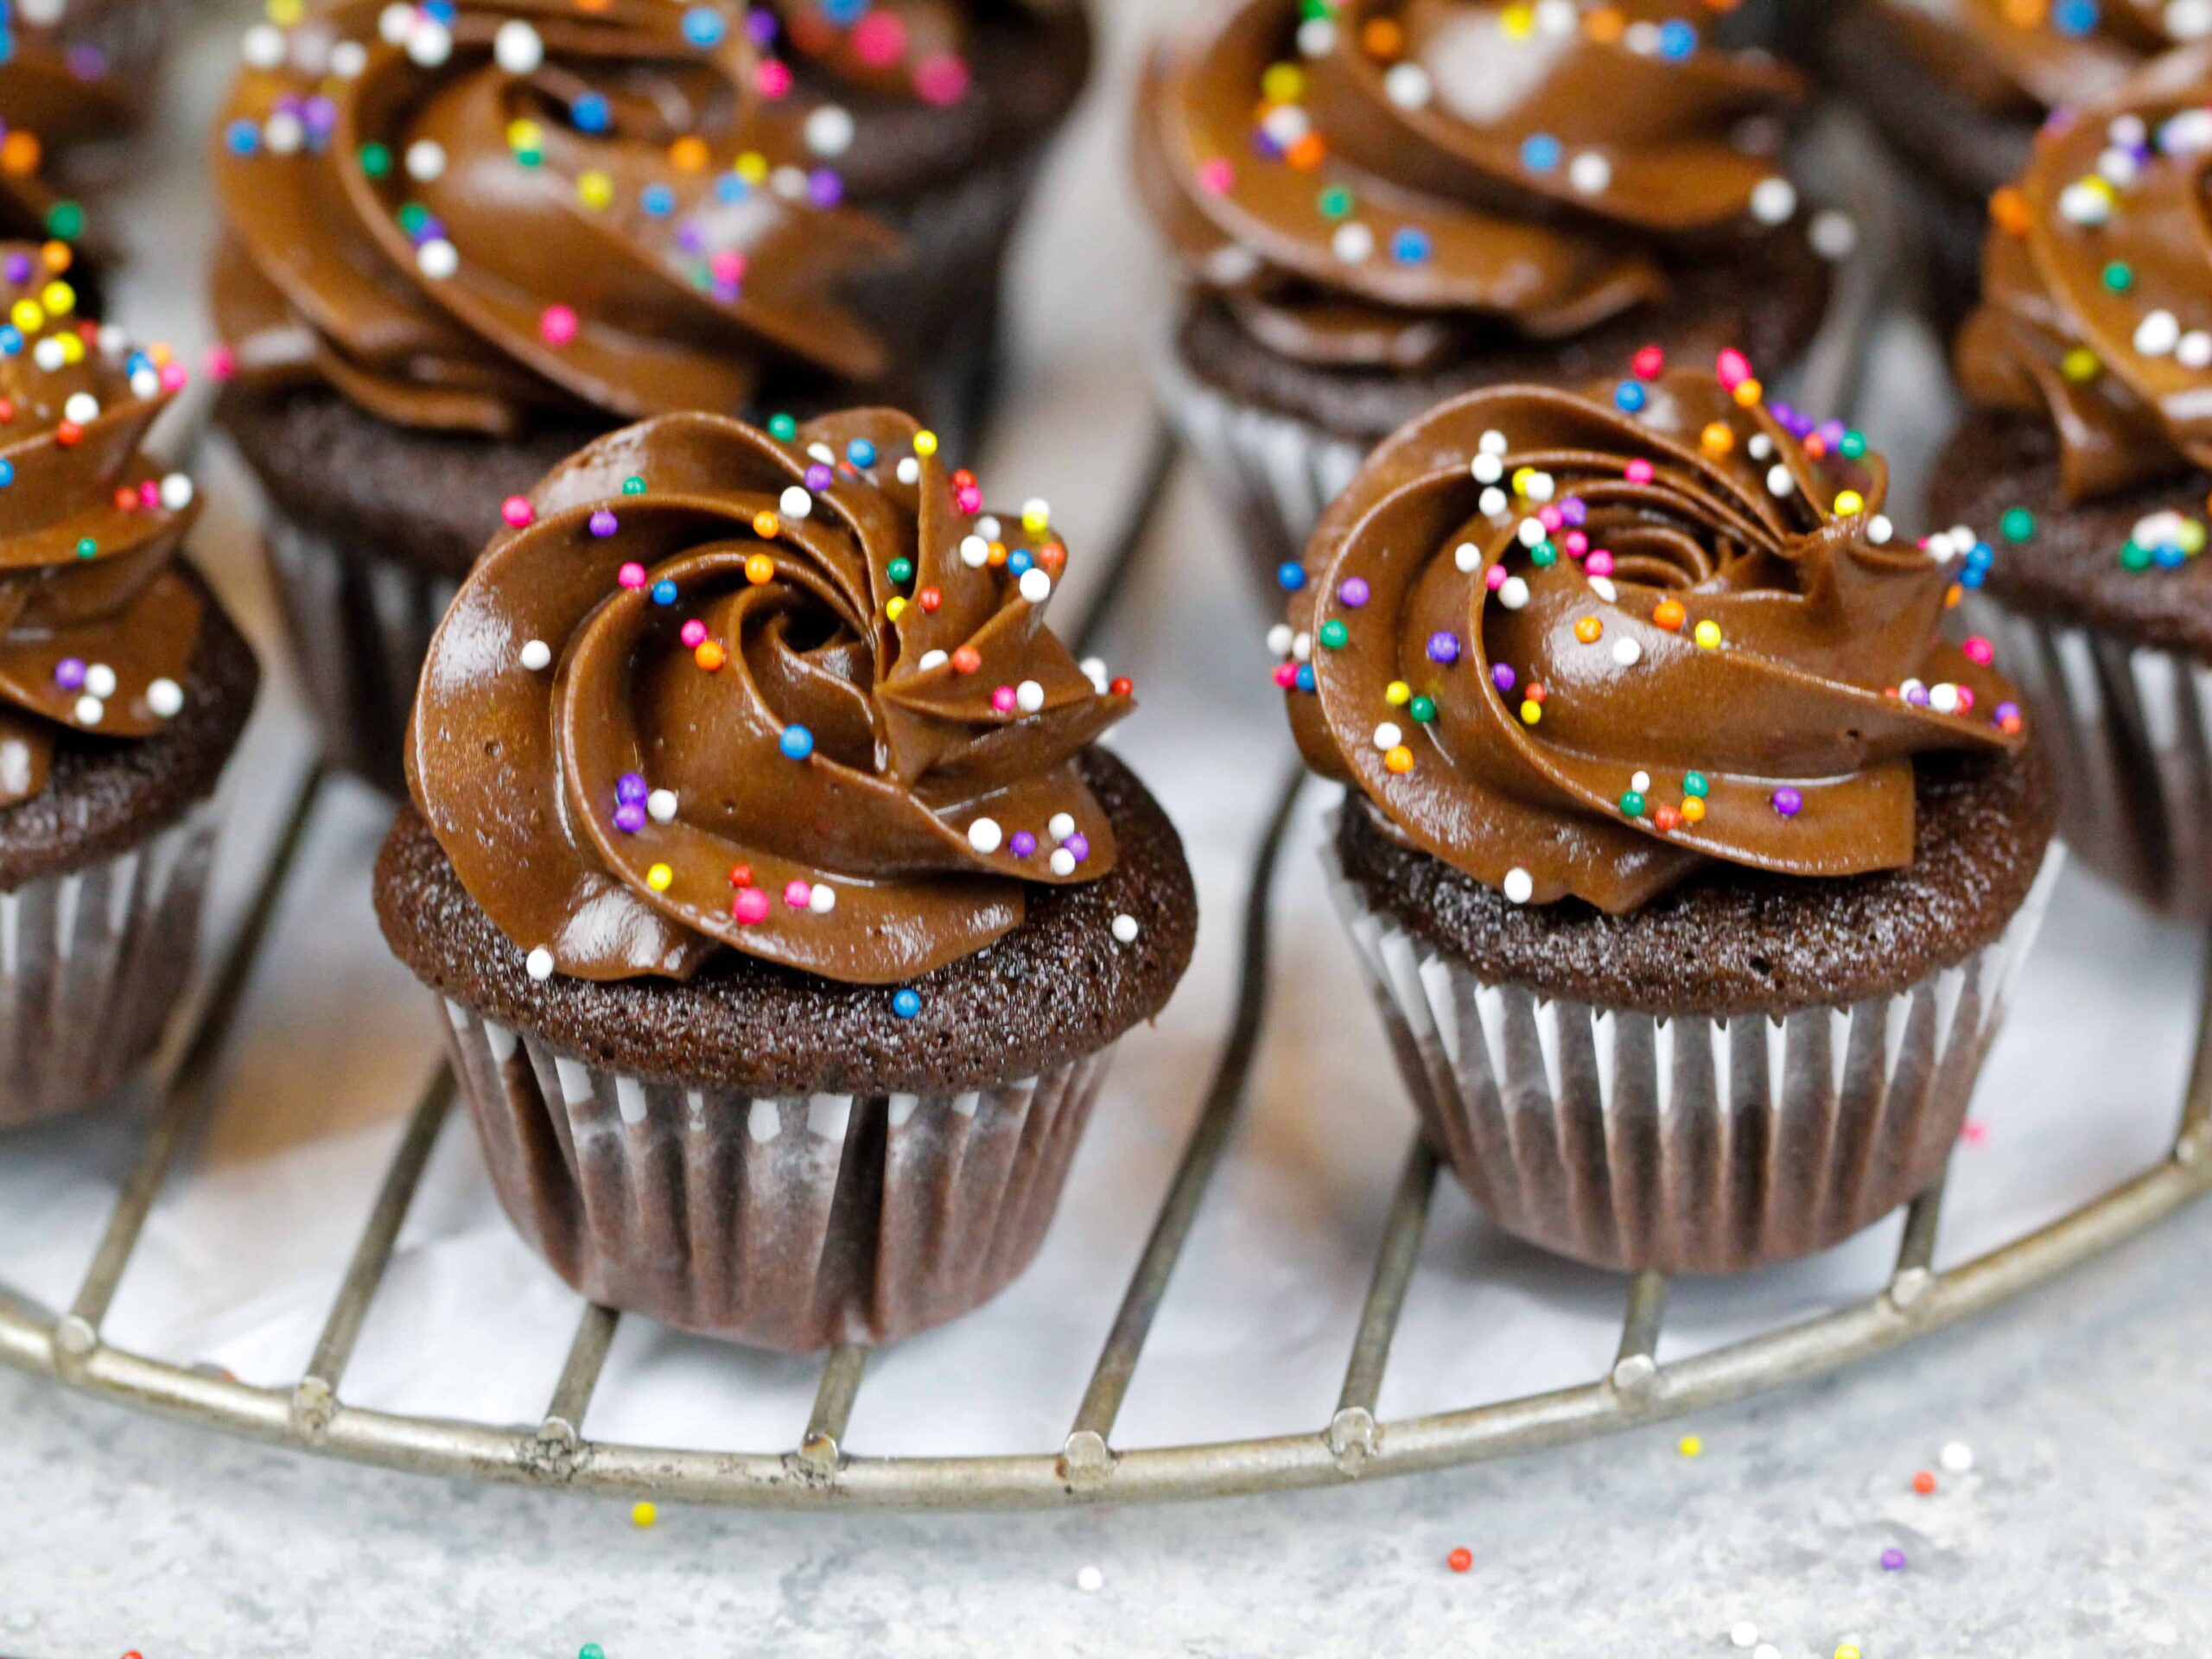 image of mini chocolate cupcakes that have been decorated with dark chocolate frosting and rainbow sprinkles